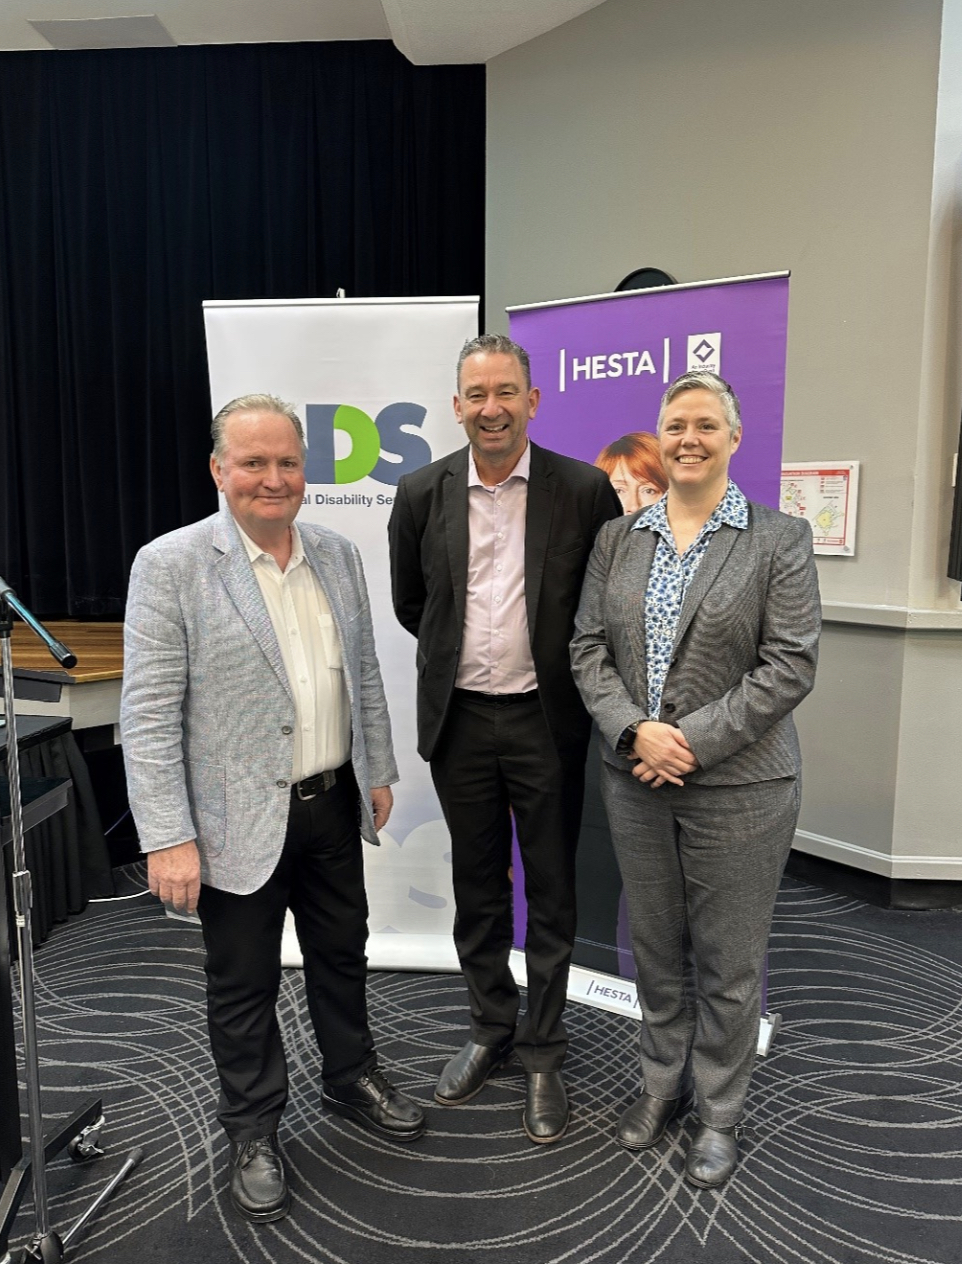 Hot topics breakfast in Queensland, from left: Jason McKey, State Manager Qld; Hon Craig Crawford, Minister for Child Safety and Seniors and Disability Services; Laurie Leigh, NDS CEO 